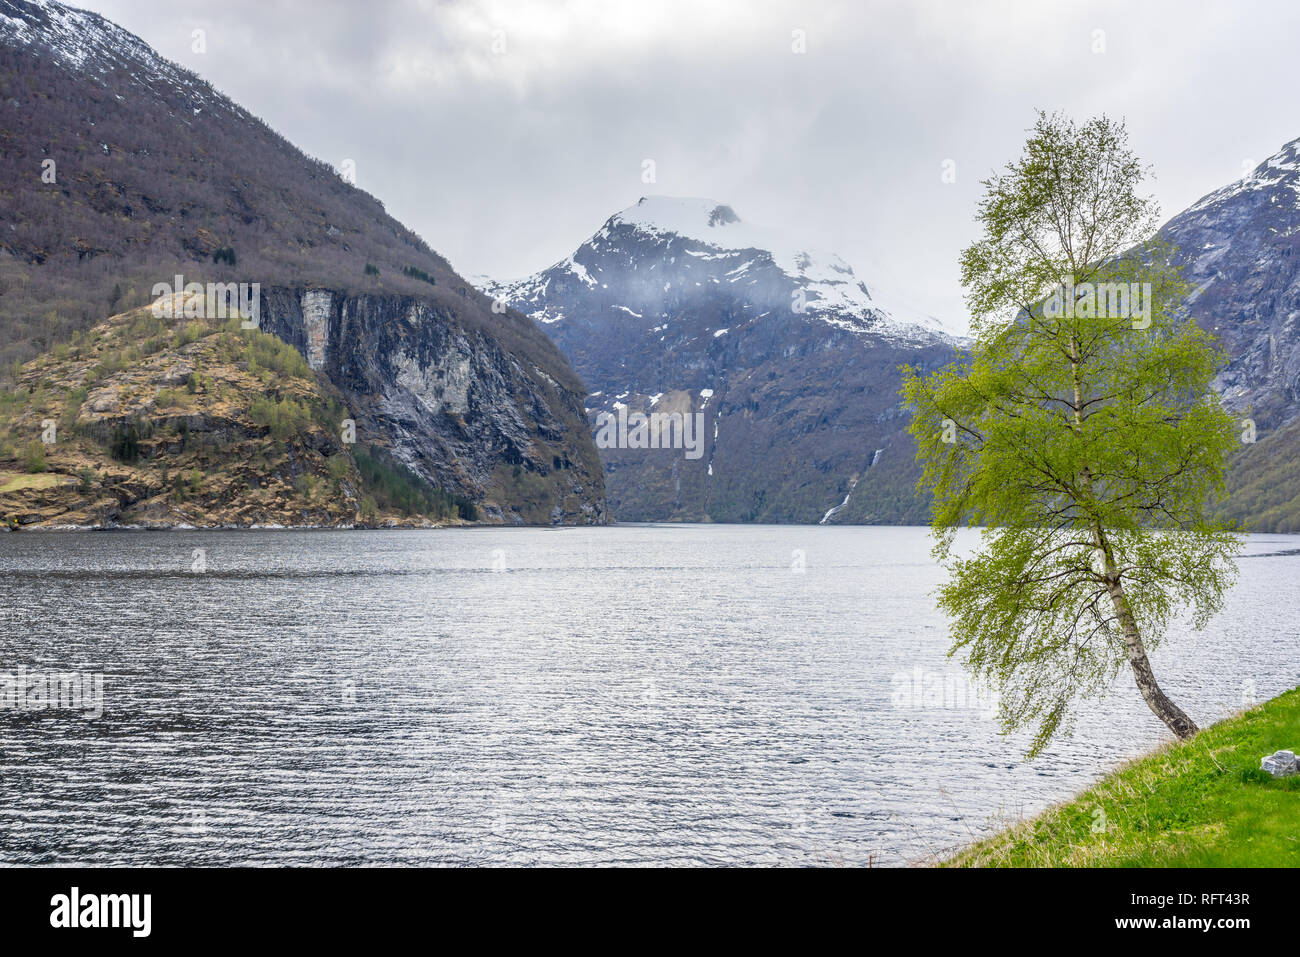 Birch tree on the shore of Geirangerfjord, Norway Stock Photo